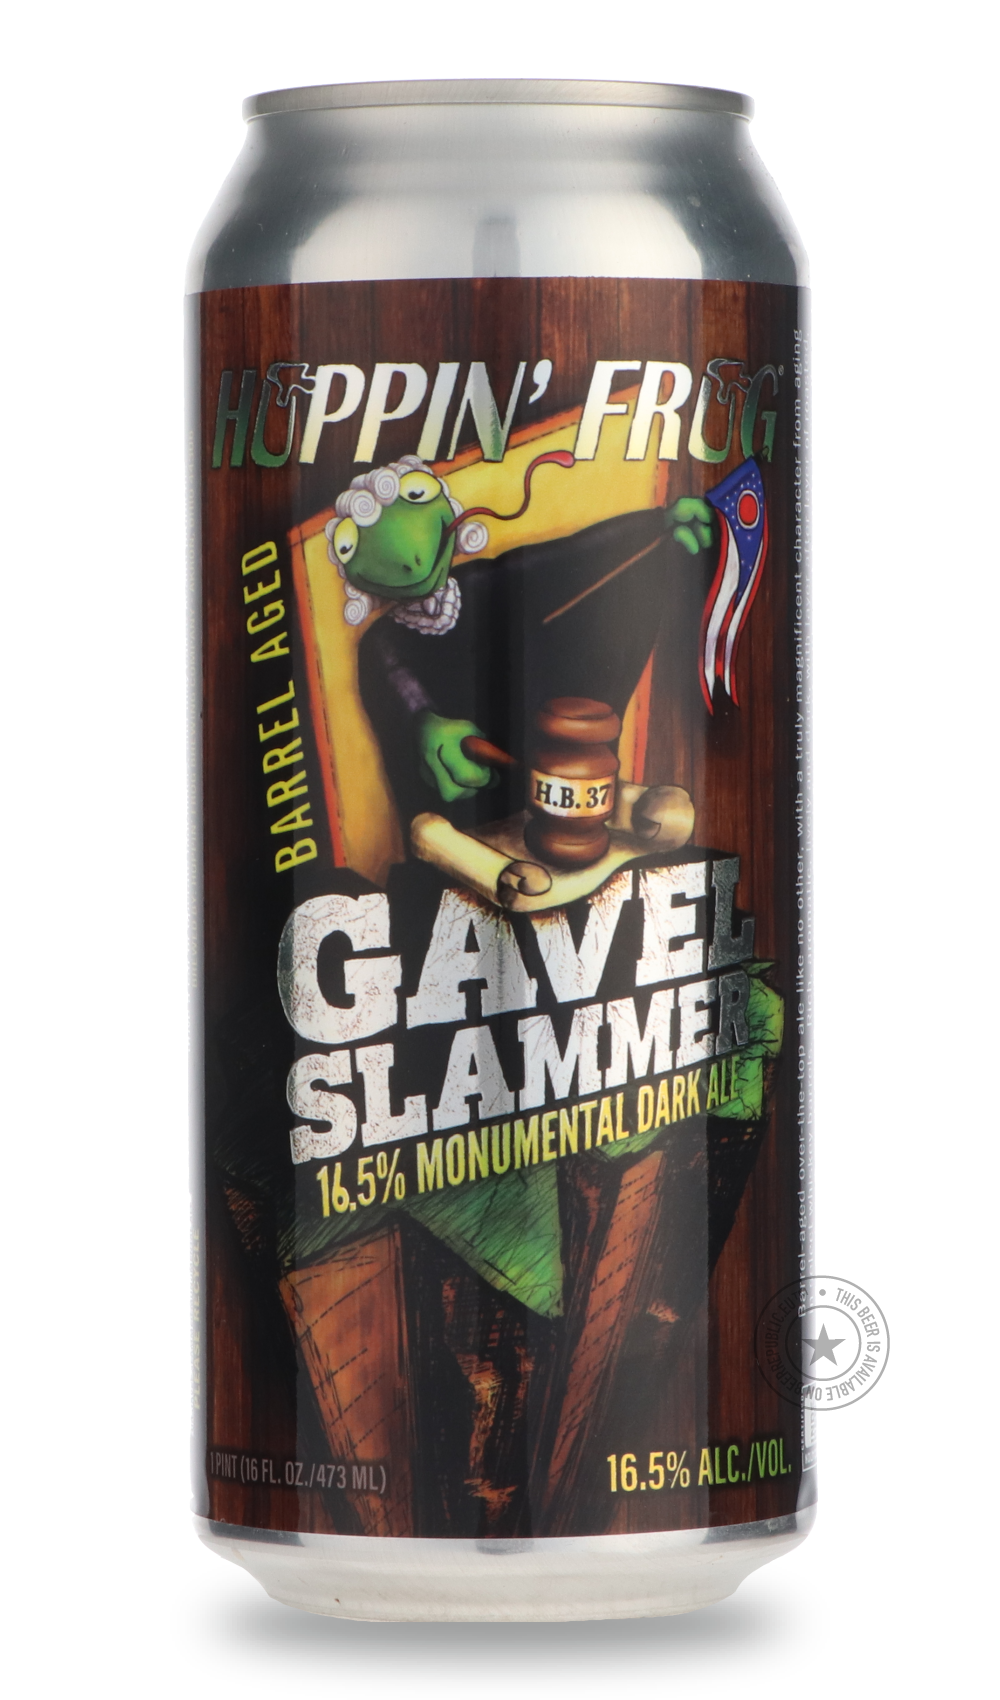 -Hoppin' Frog- Barrel Aged Gavel Slammer-Brown & Dark- Only @ Beer Republic - The best online beer store for American & Canadian craft beer - Buy beer online from the USA and Canada - Bier online kopen - Amerikaans bier kopen - Craft beer store - Craft beer kopen - Amerikanisch bier kaufen - Bier online kaufen - Acheter biere online - IPA - Stout - Porter - New England IPA - Hazy IPA - Imperial Stout - Barrel Aged - Barrel Aged Imperial Stout - Brown - Dark beer - Blond - Blonde - Pilsner - Lager - Wheat - 